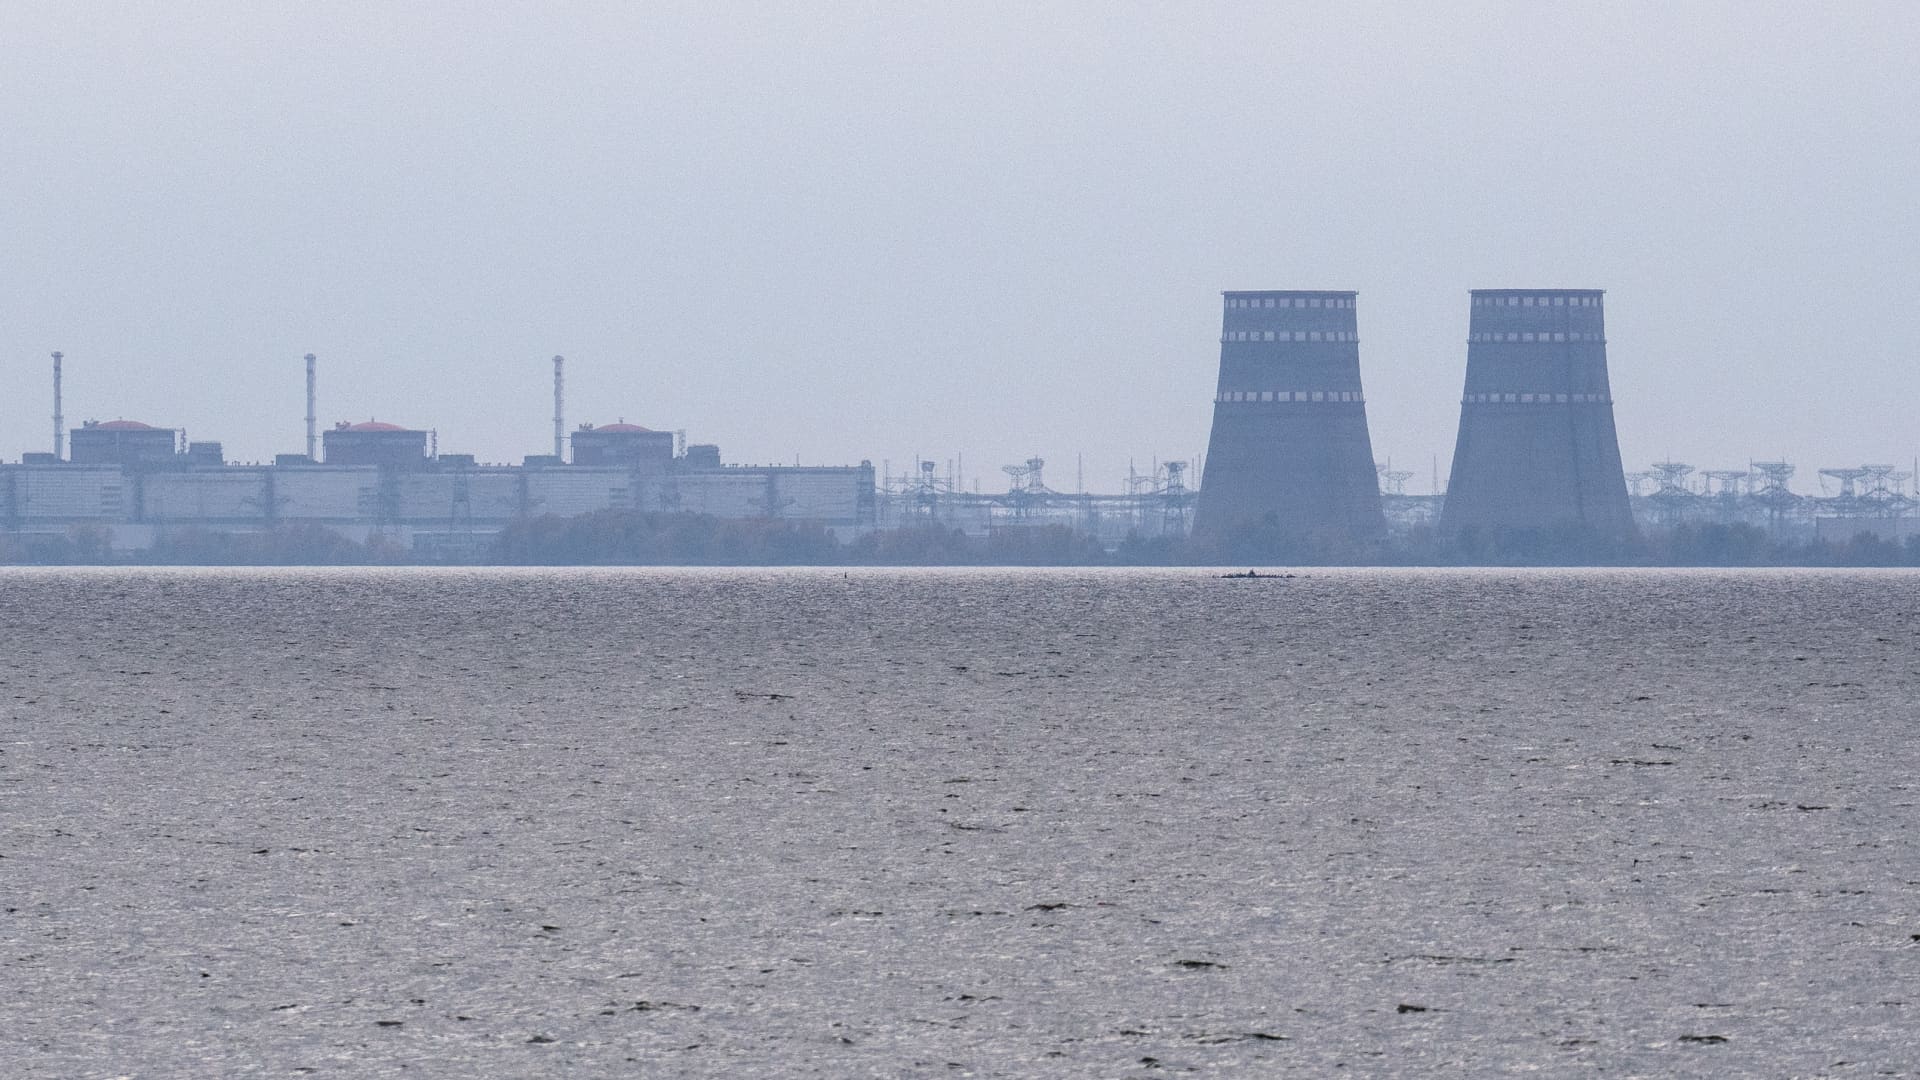 Zaporizhzhia Nuclear Power Plant, Europe's largest nuclear power station.